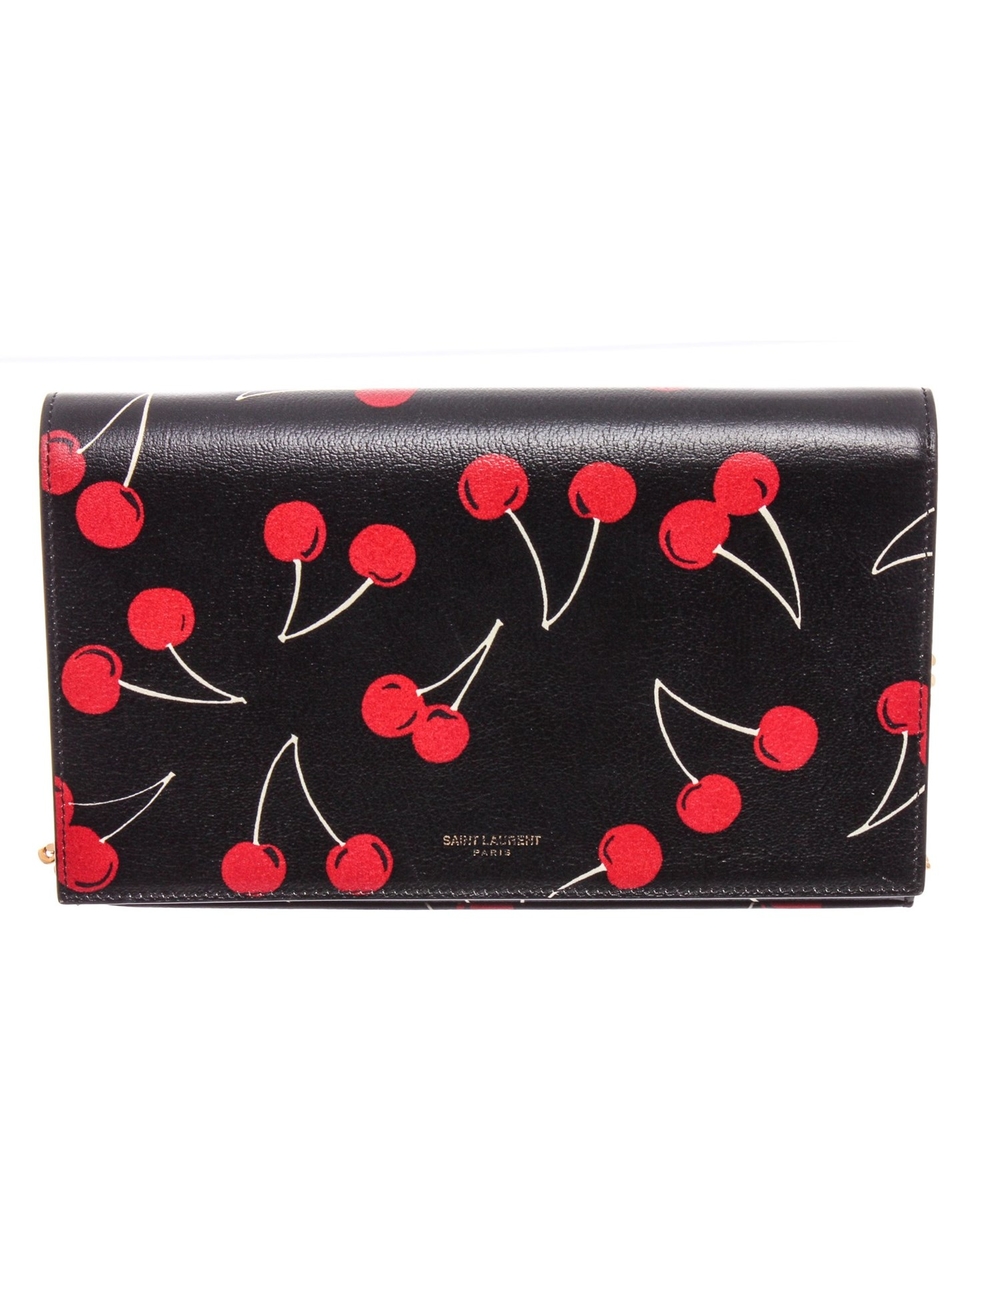 Black, red and white leather Saint Laurent YSL cherry printed wallet on chain with gold-tone hardwar